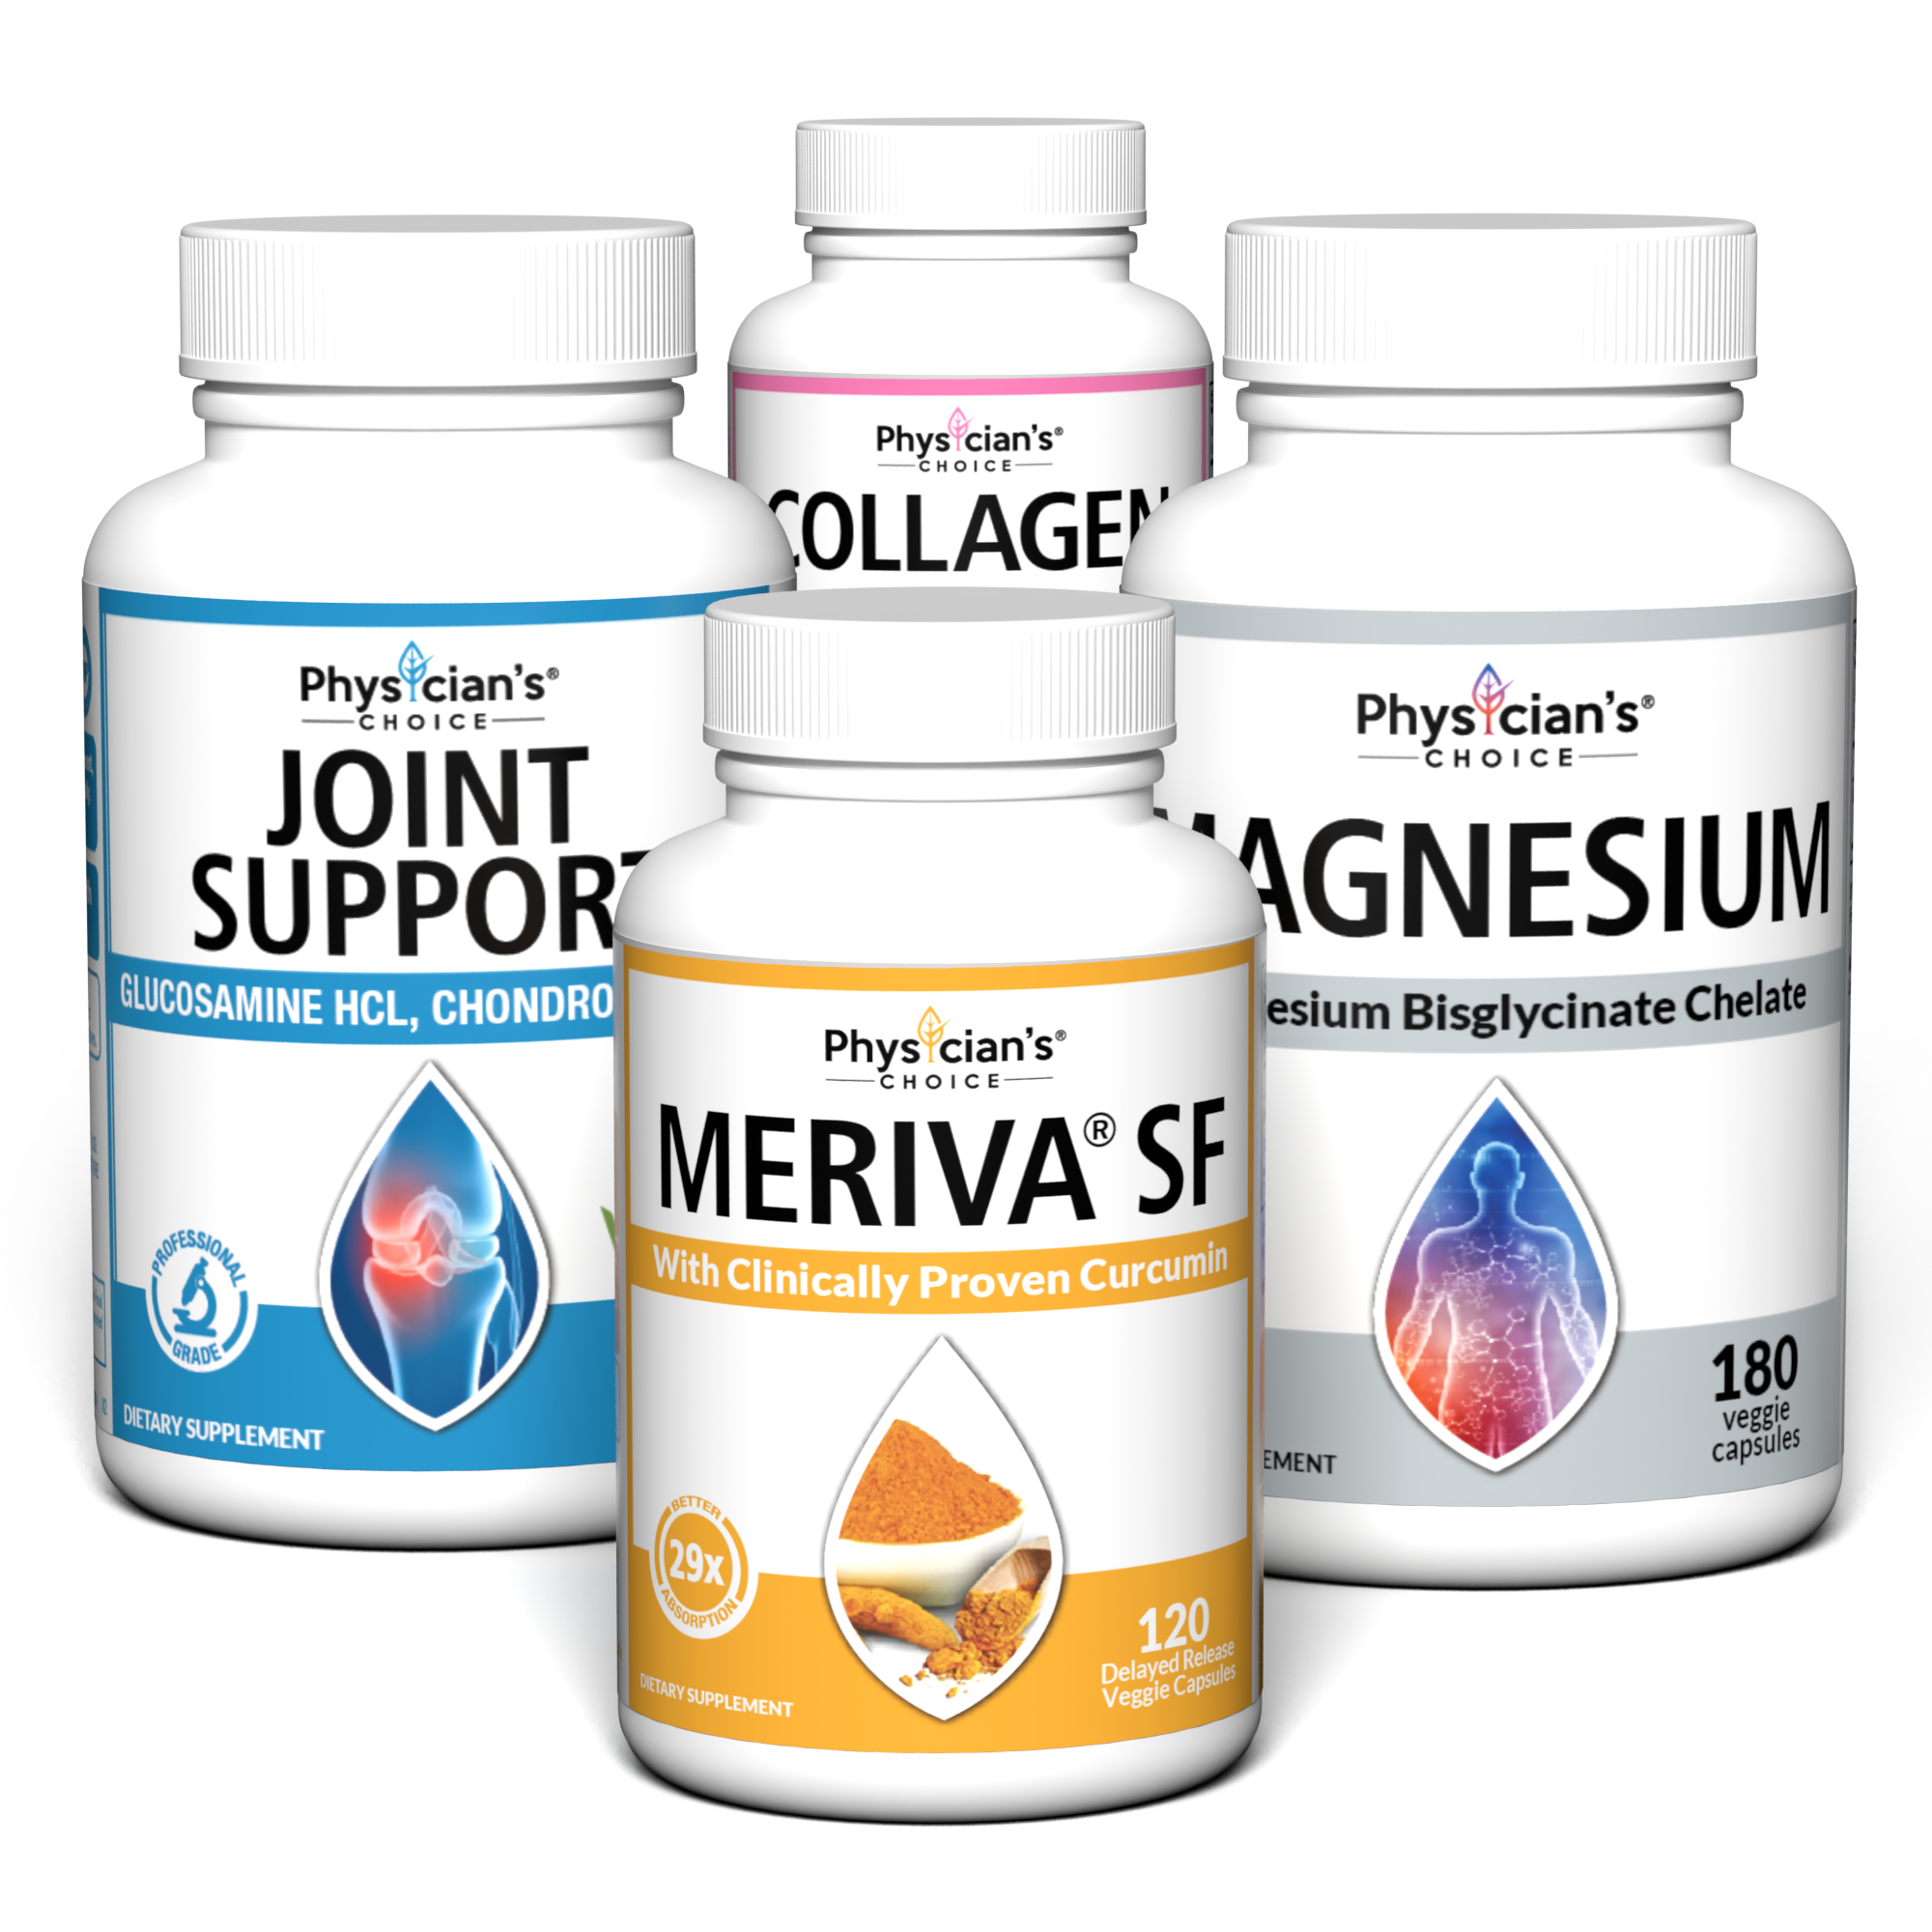 Bone and Joint Health Bundle featuring Joint Support, Meriva SF, Magnesium, and Collagen